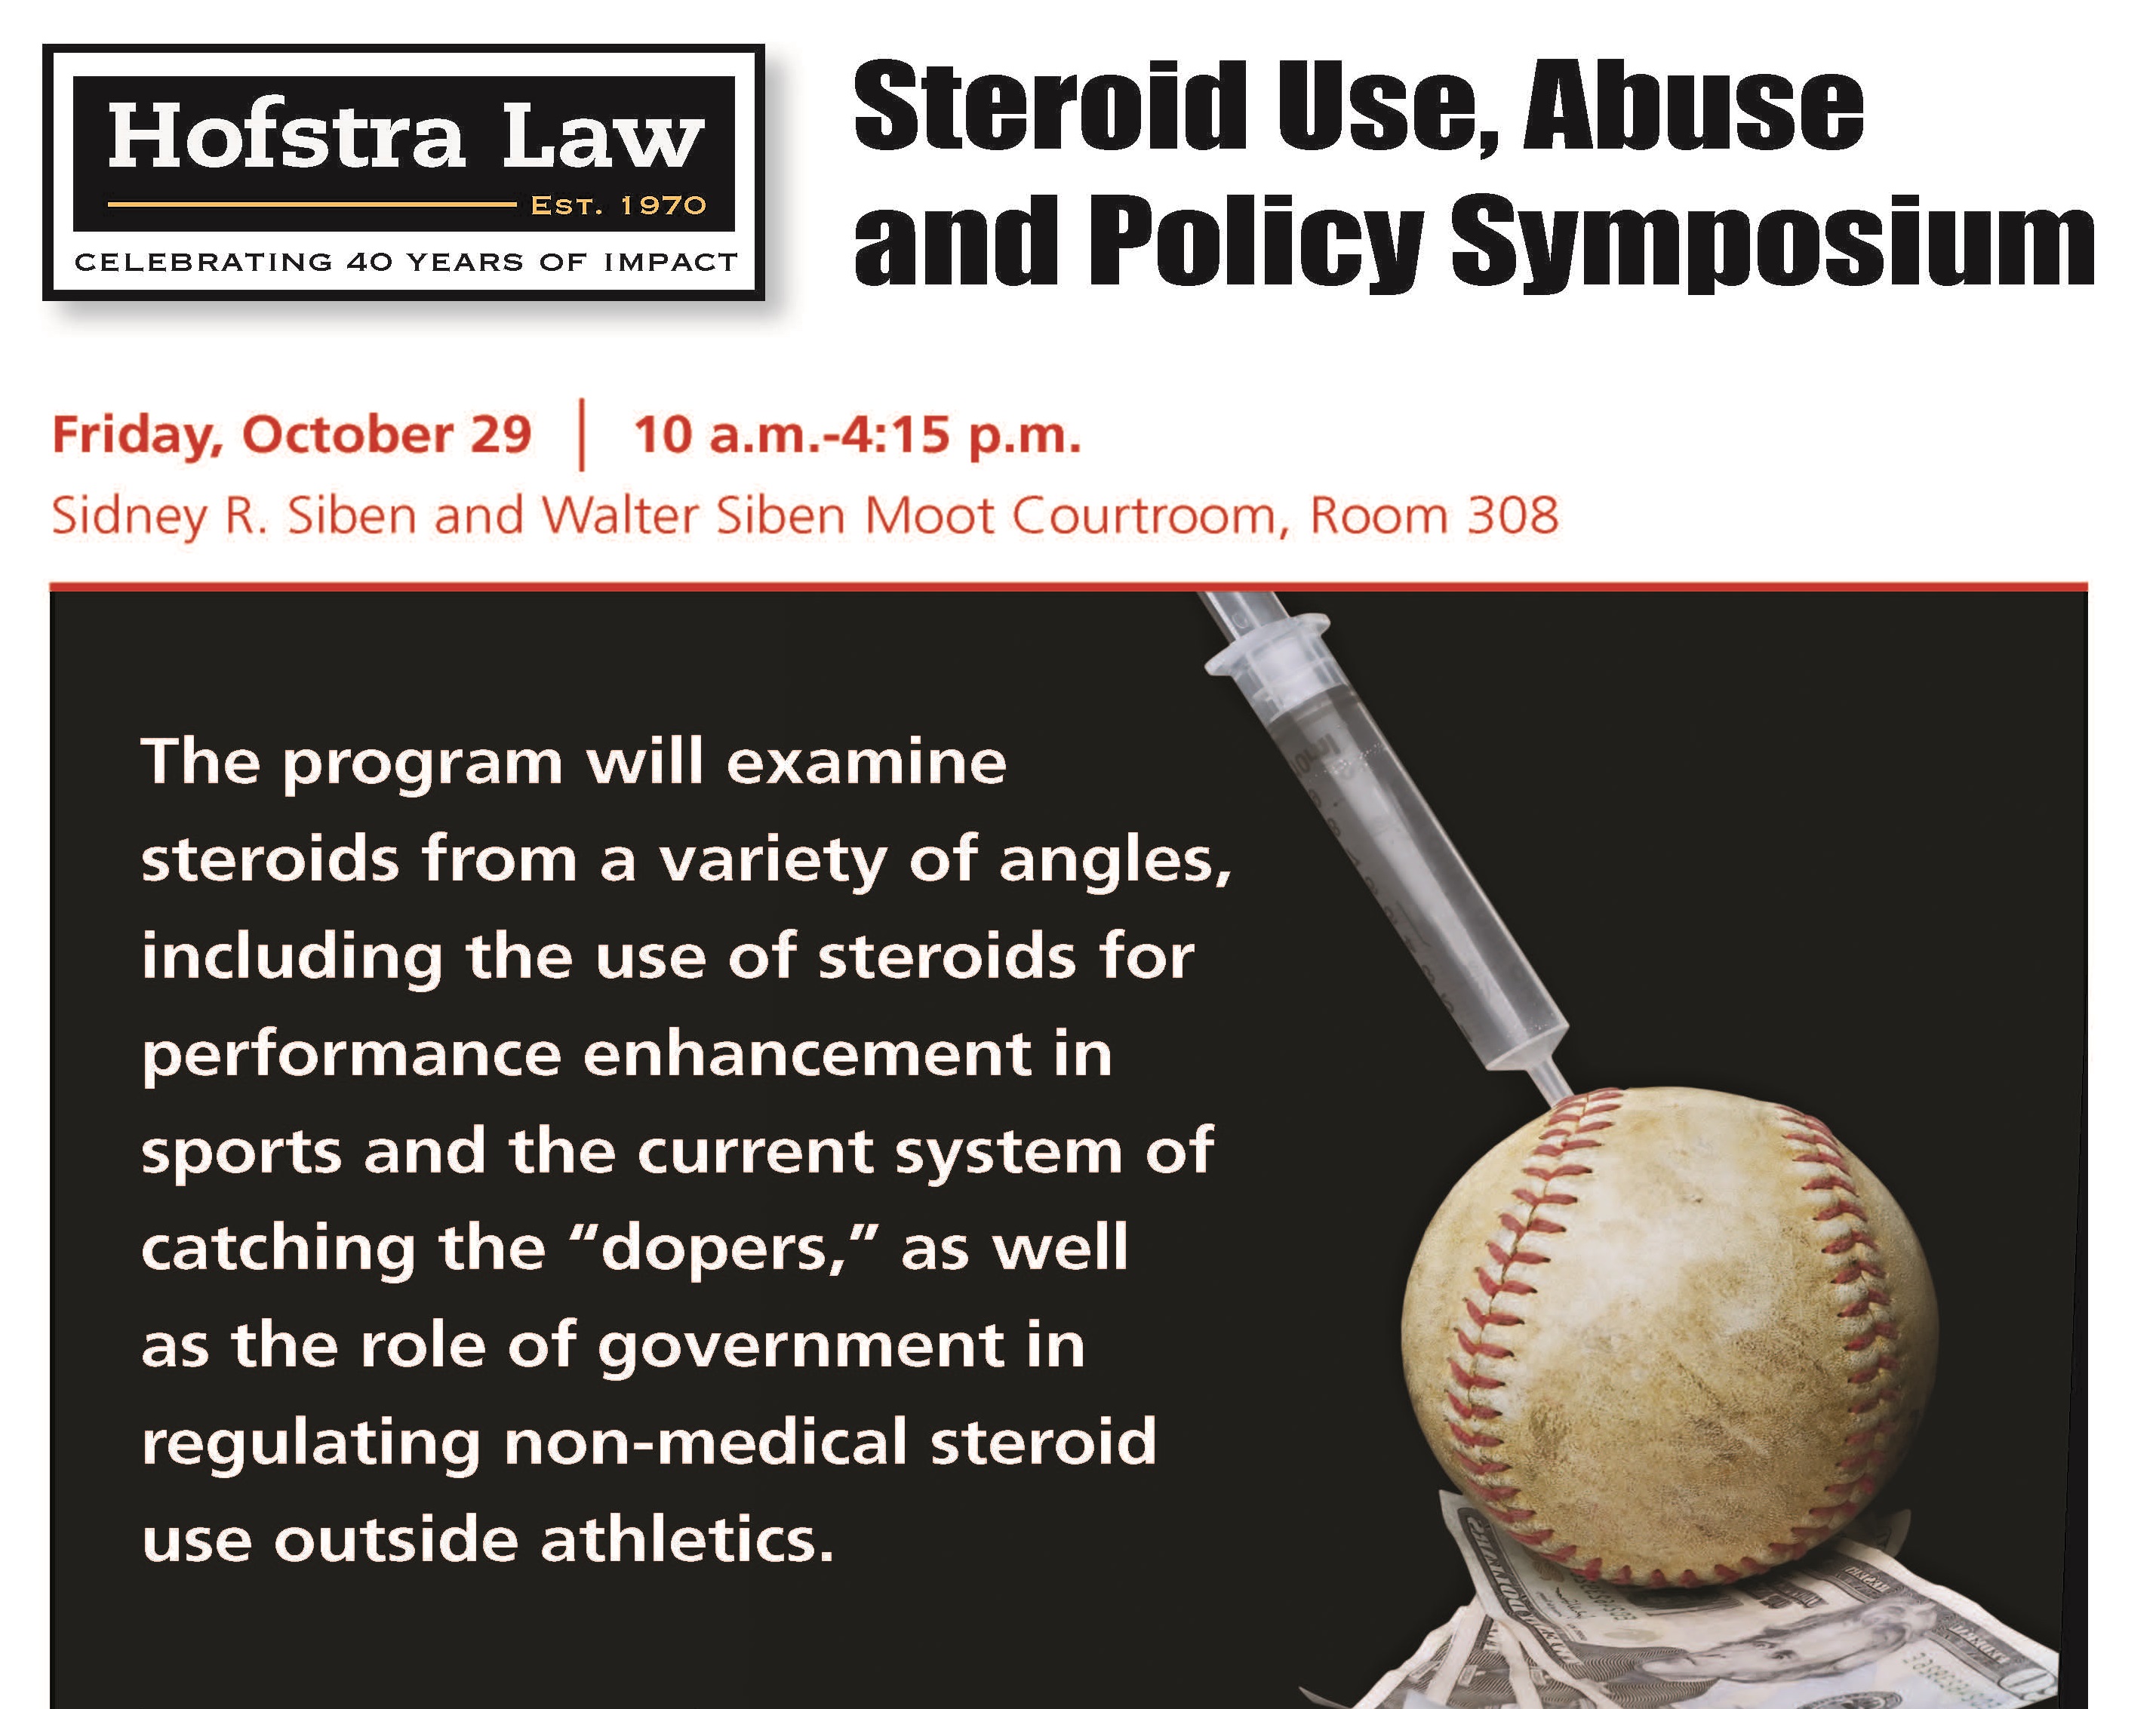 Steroid Use, Abuse and Policy Symposium (2010)